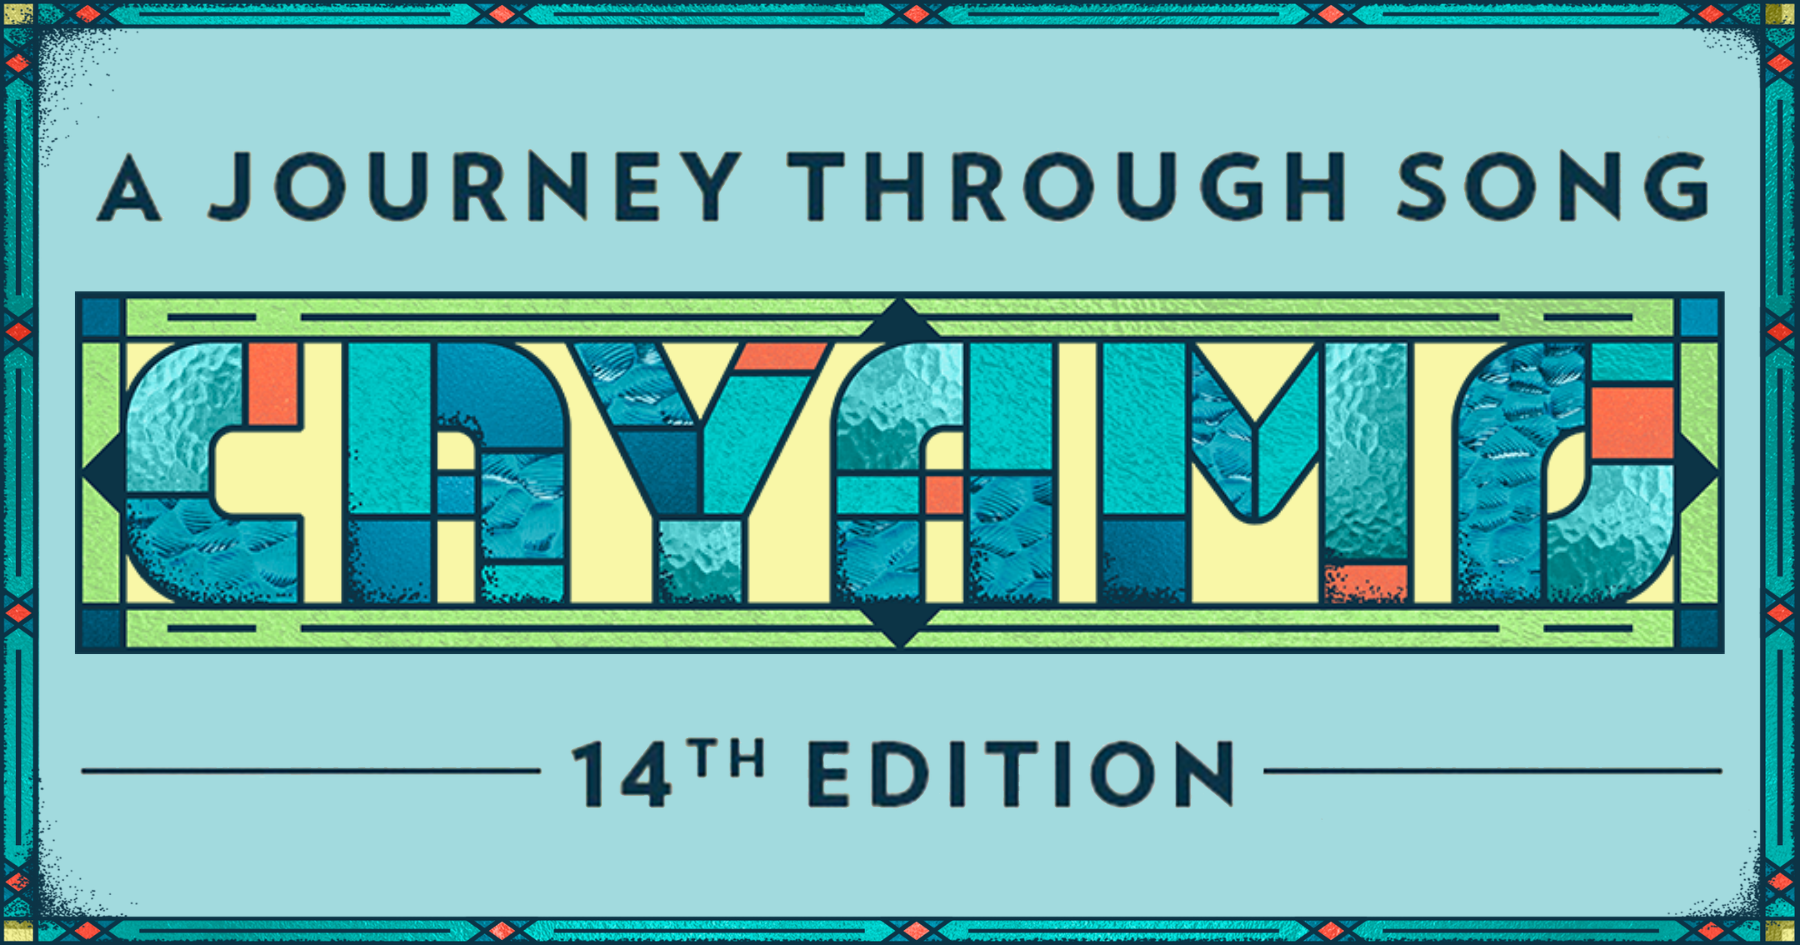 Cayamo: Setting Sail on a Journey Through Song